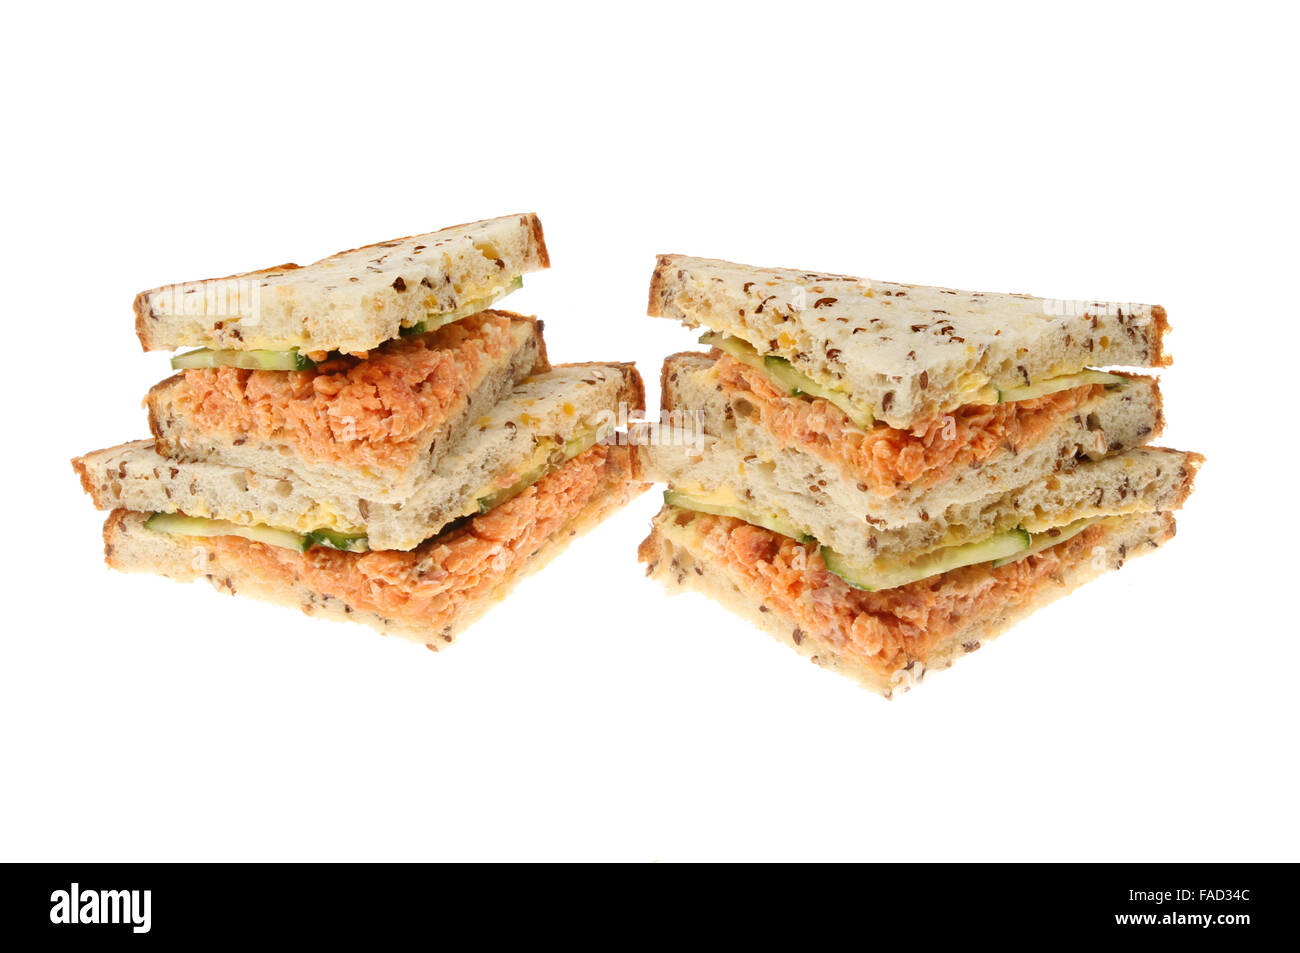 Salmon and cucumber sandwiches made with soya and linseed bread isolated against white Stock Photo